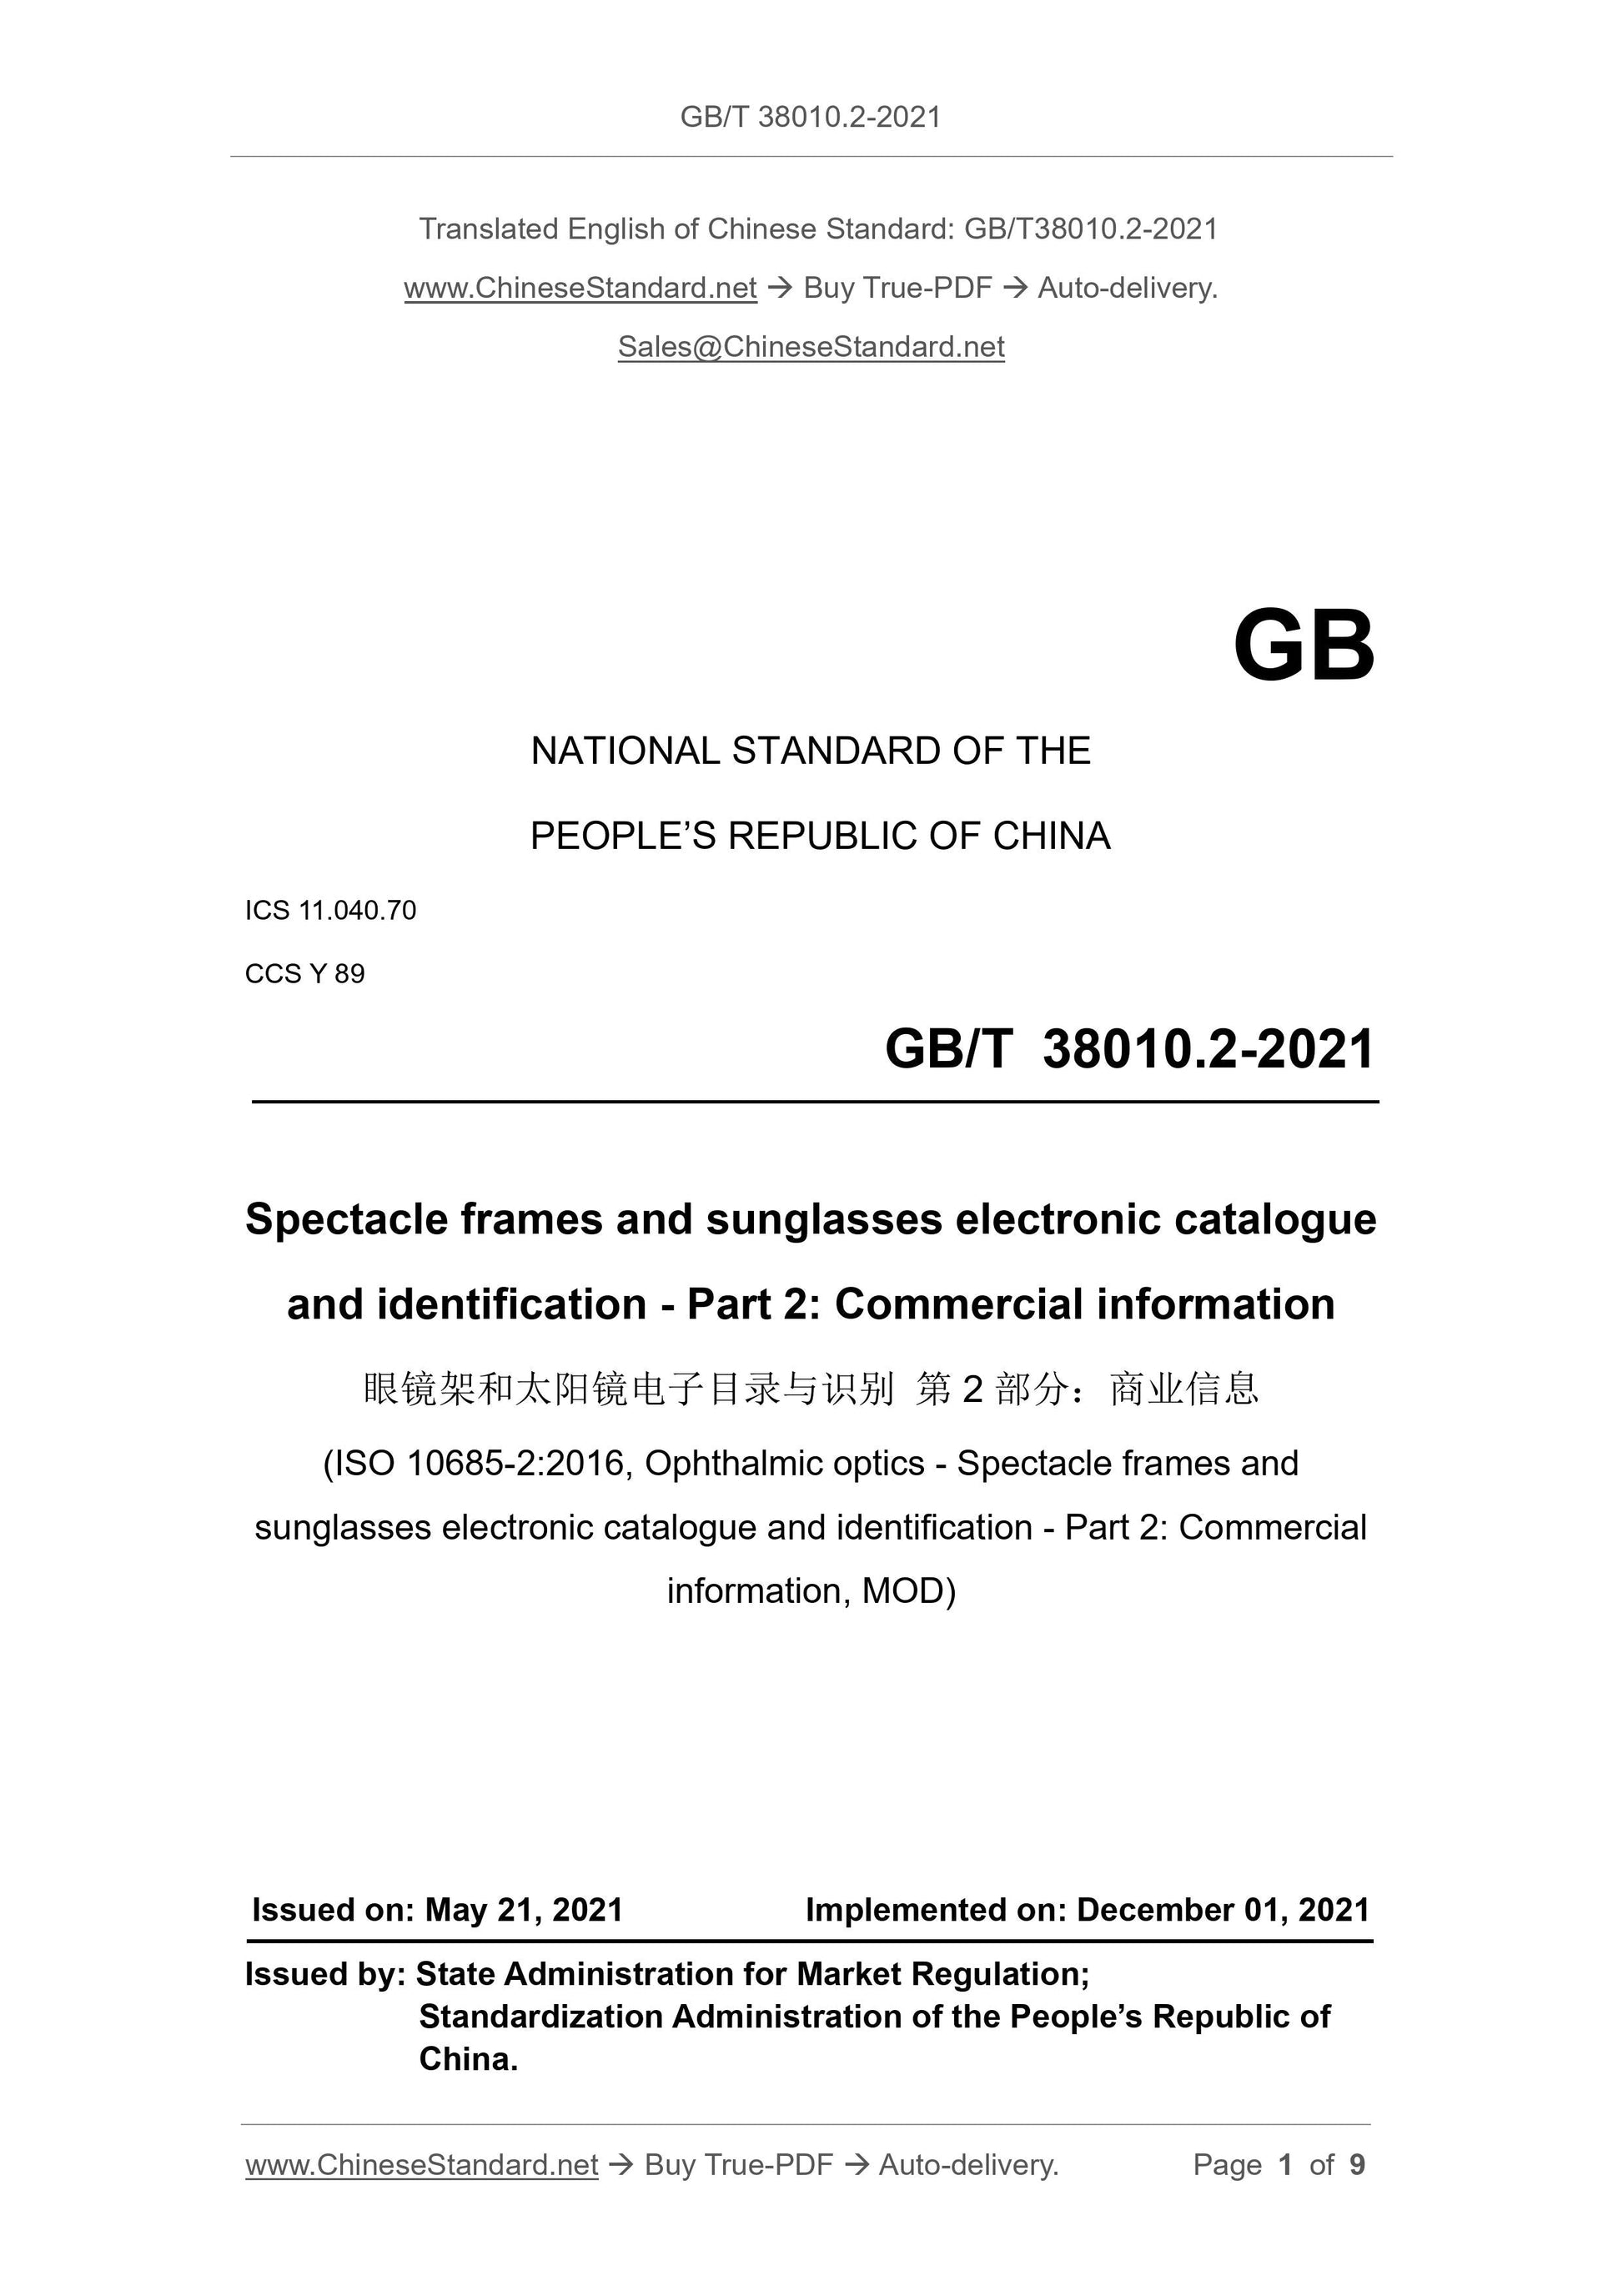 GB/T 38010.2-2021 Page 1